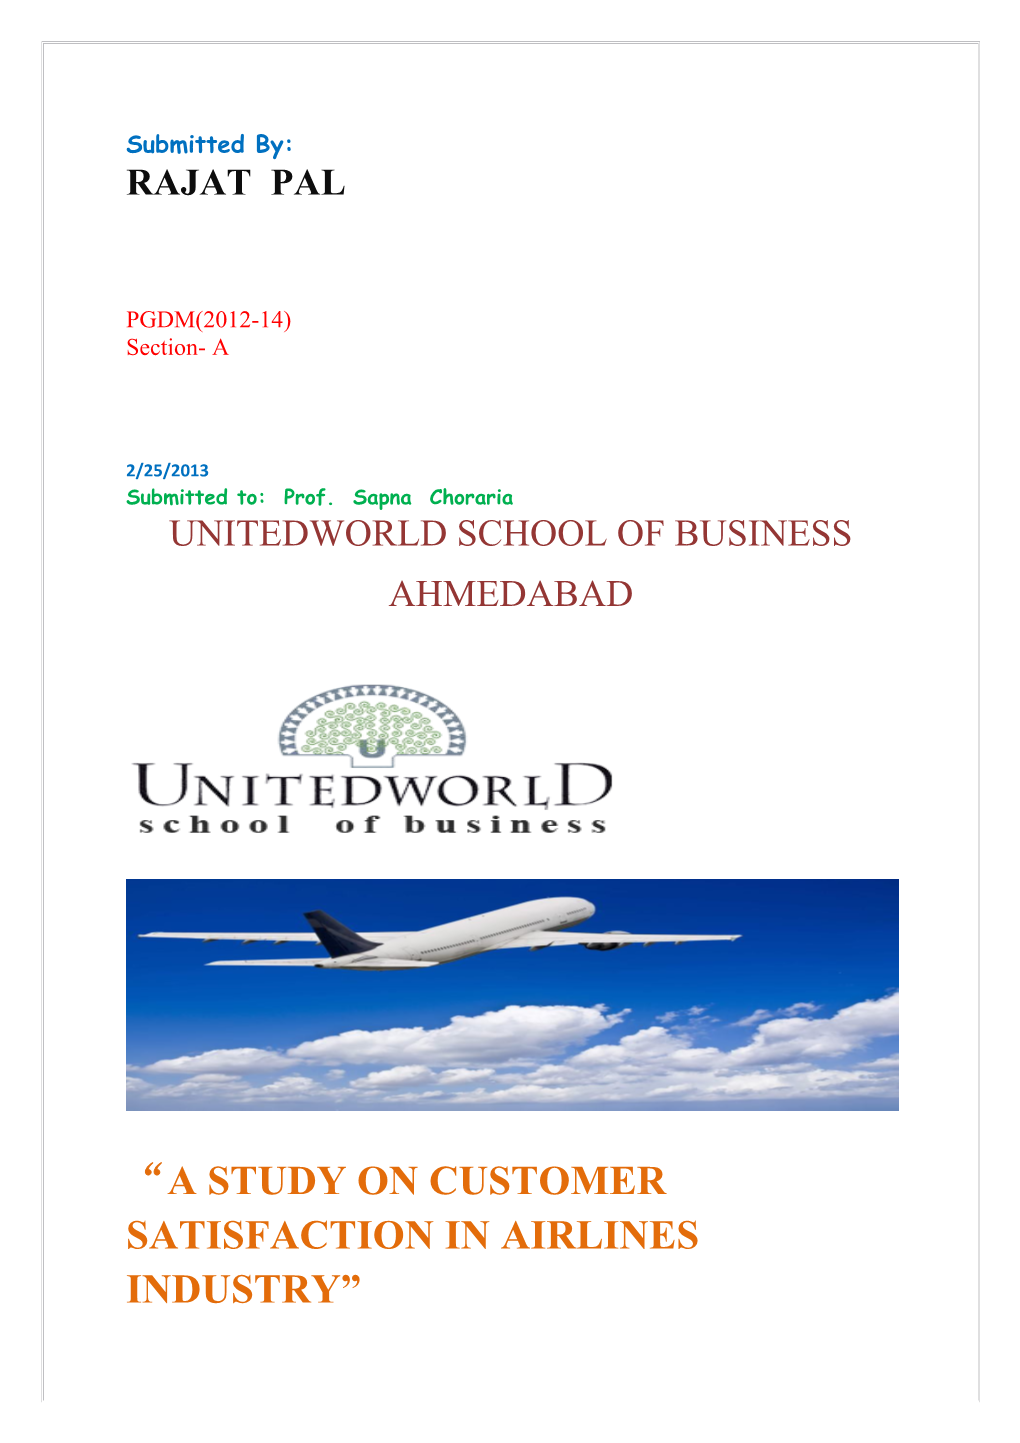 A Study on Customer Satisfaction in Airlines Industry